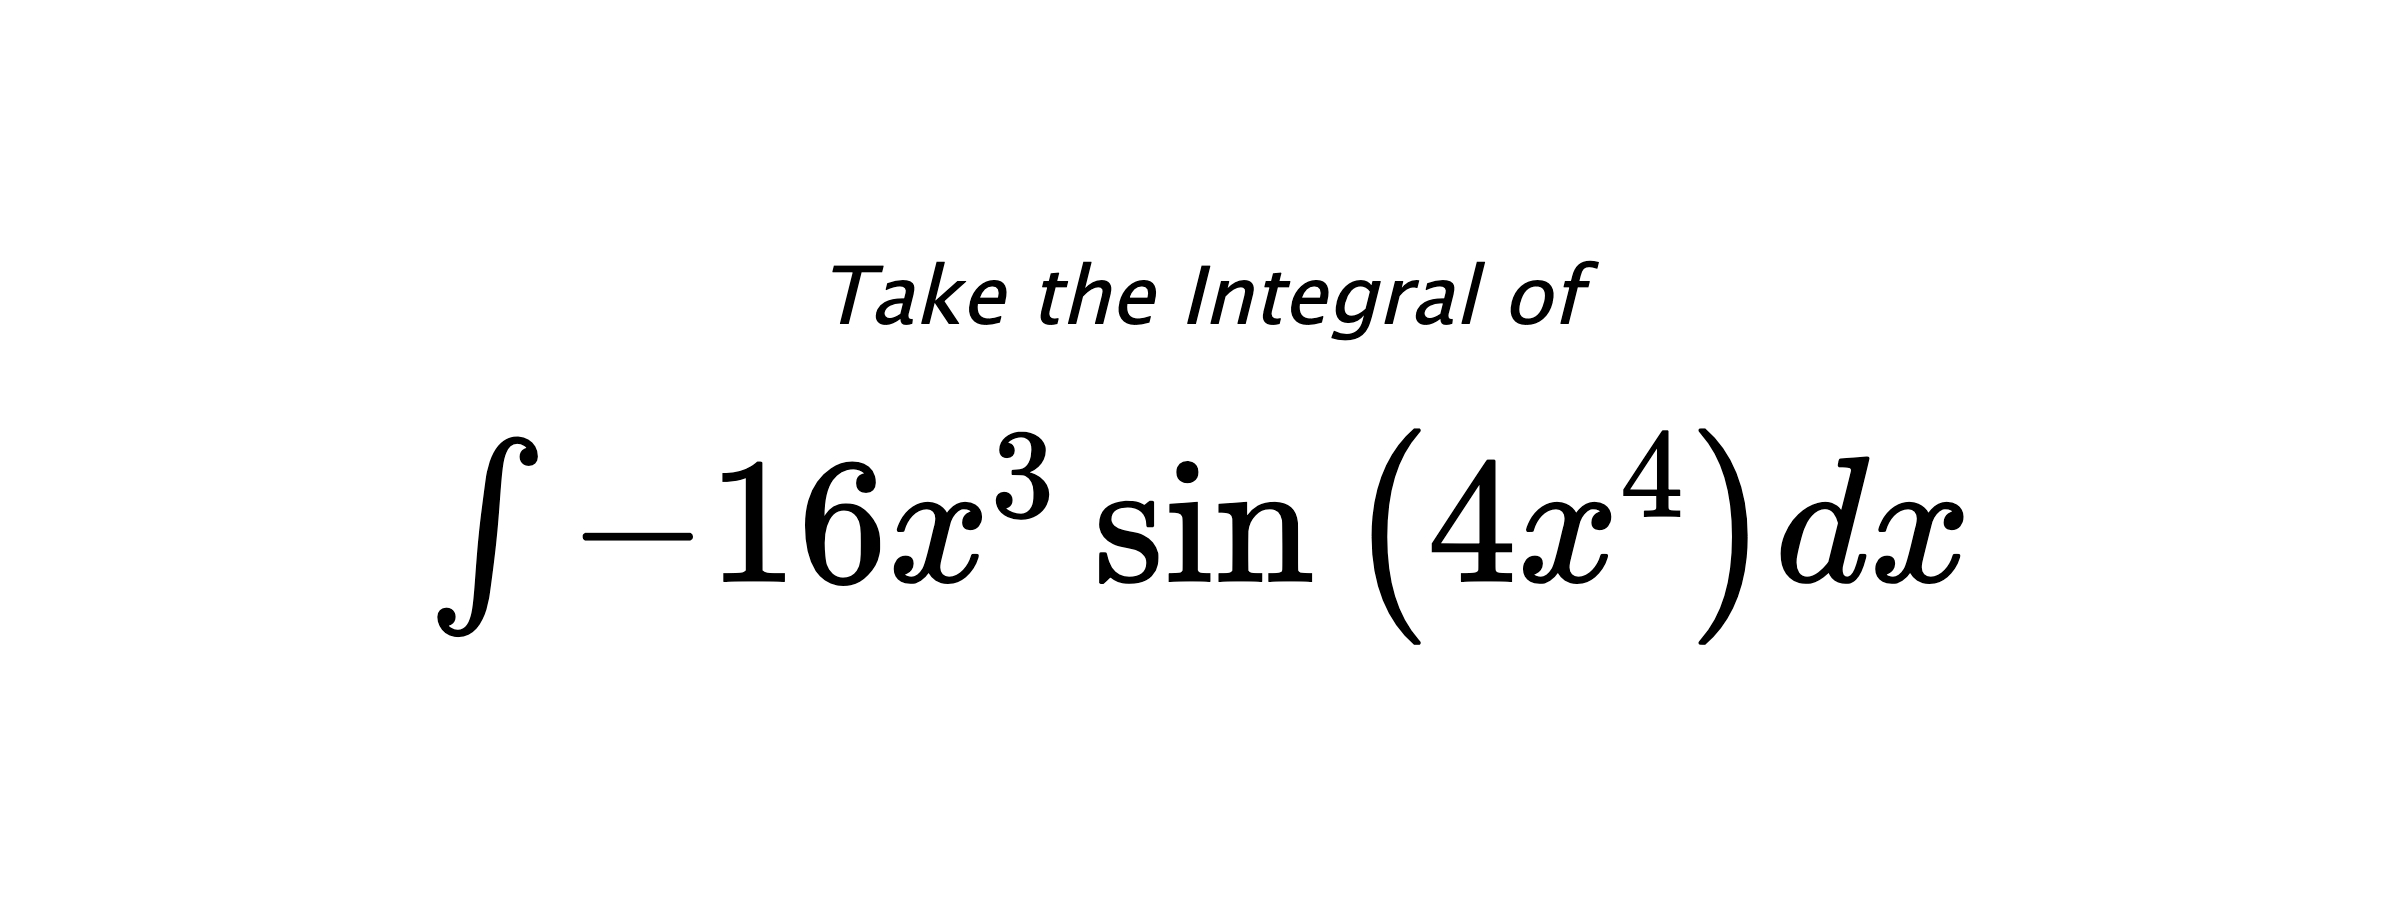 Take the Integral of $ \int - 16 x^{3} \sin{\left(4 x^{4} \right)} dx $